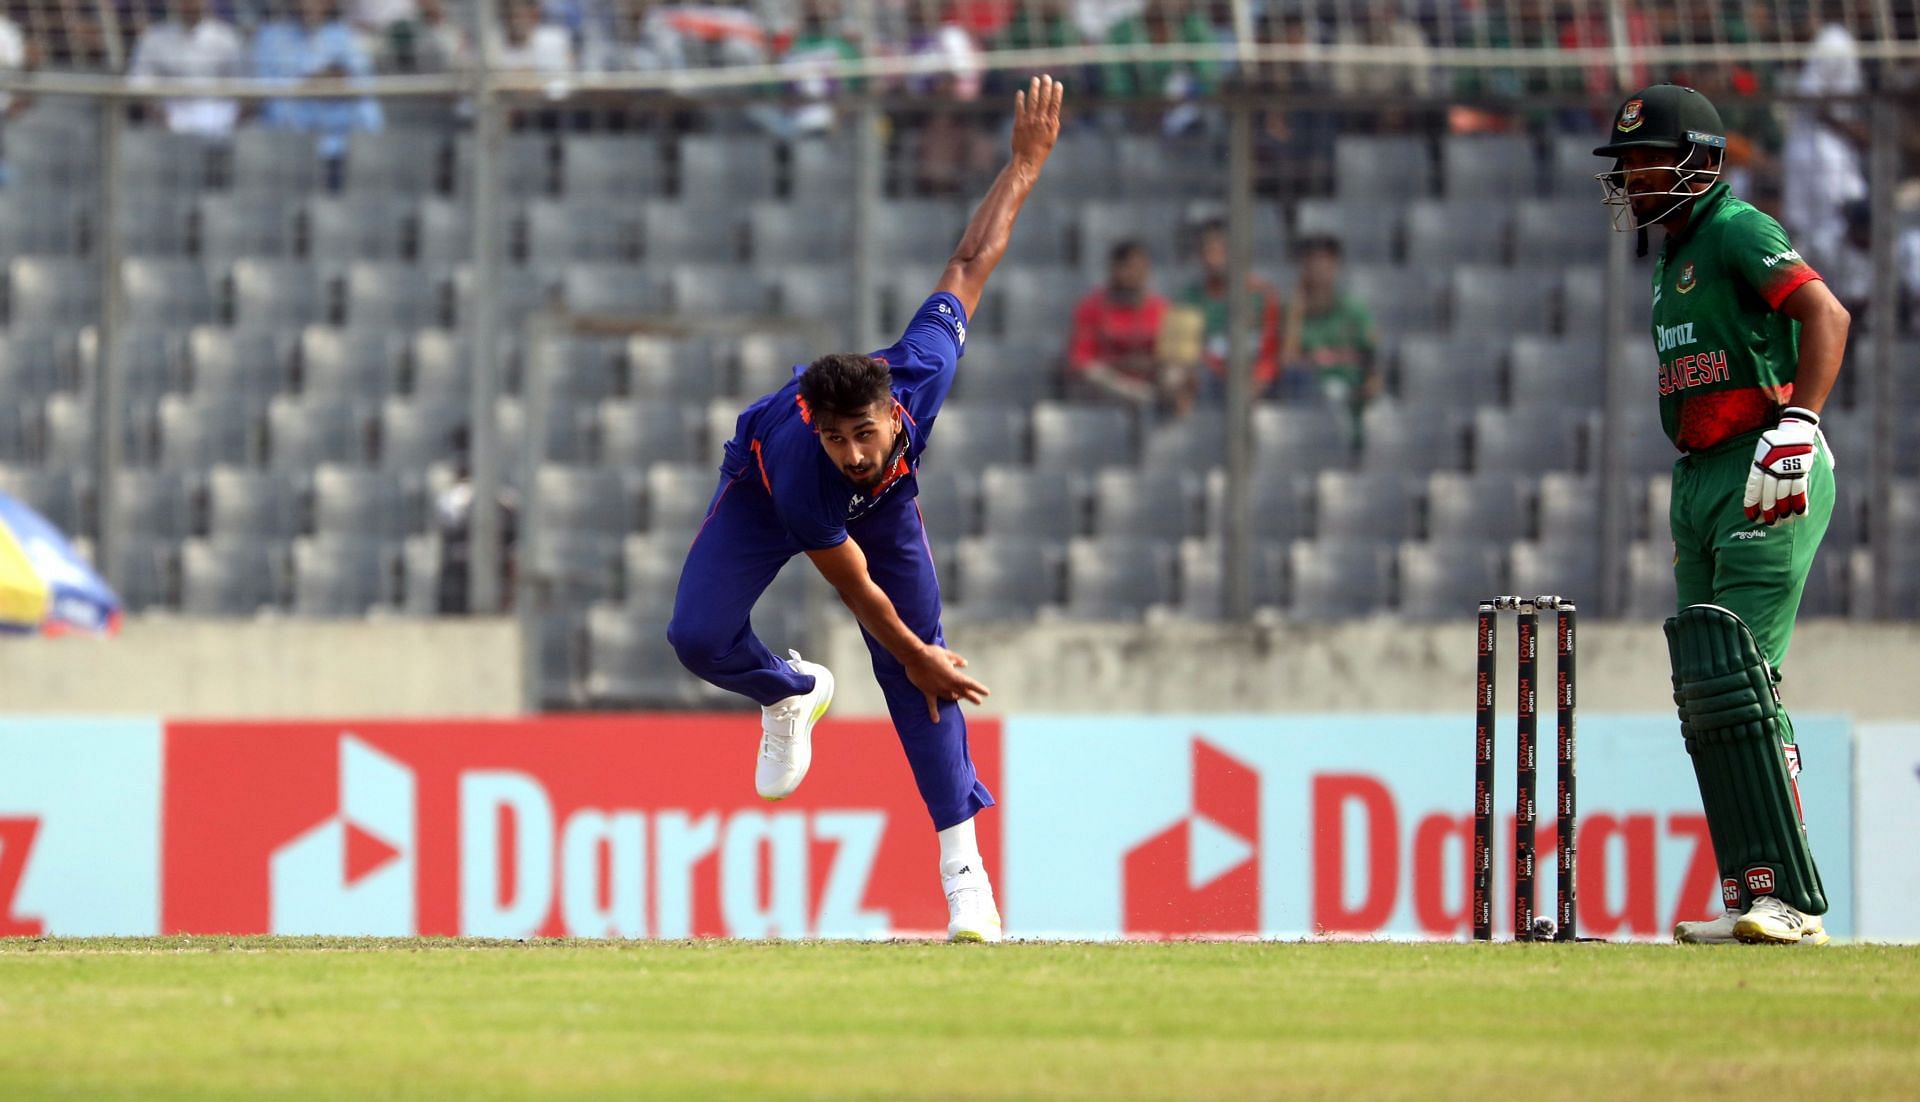 Umran Malik picked up two wickets in the second ODI against Bangladesh. [P/C: BCCI/Twitter]